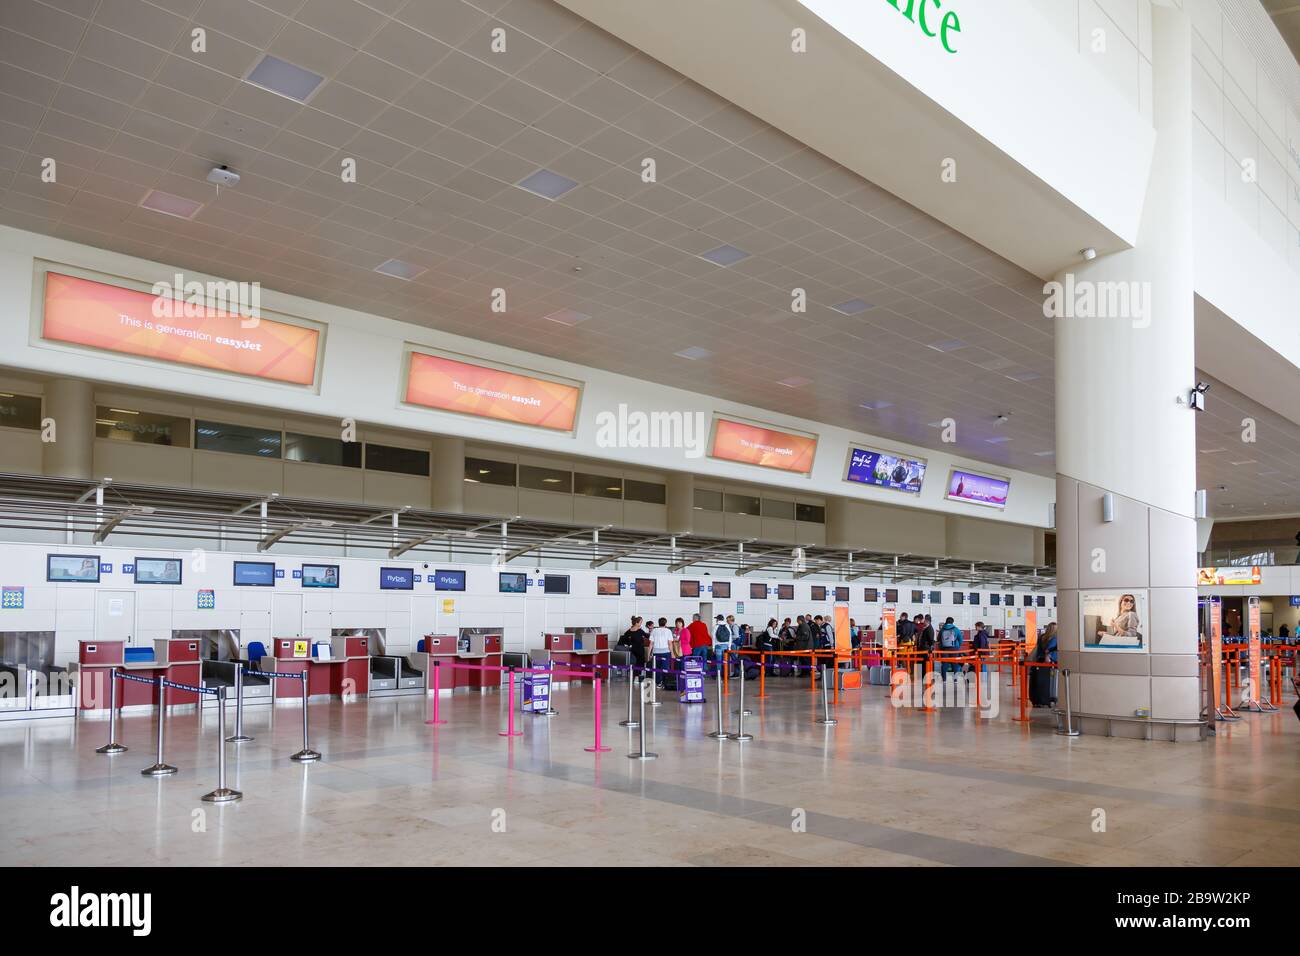 Liverpool, United Kingdom – August 14, 2017: Terminal of Liverpool John Lennon Airport (LPL) in the United Kingdom. Stock Photo